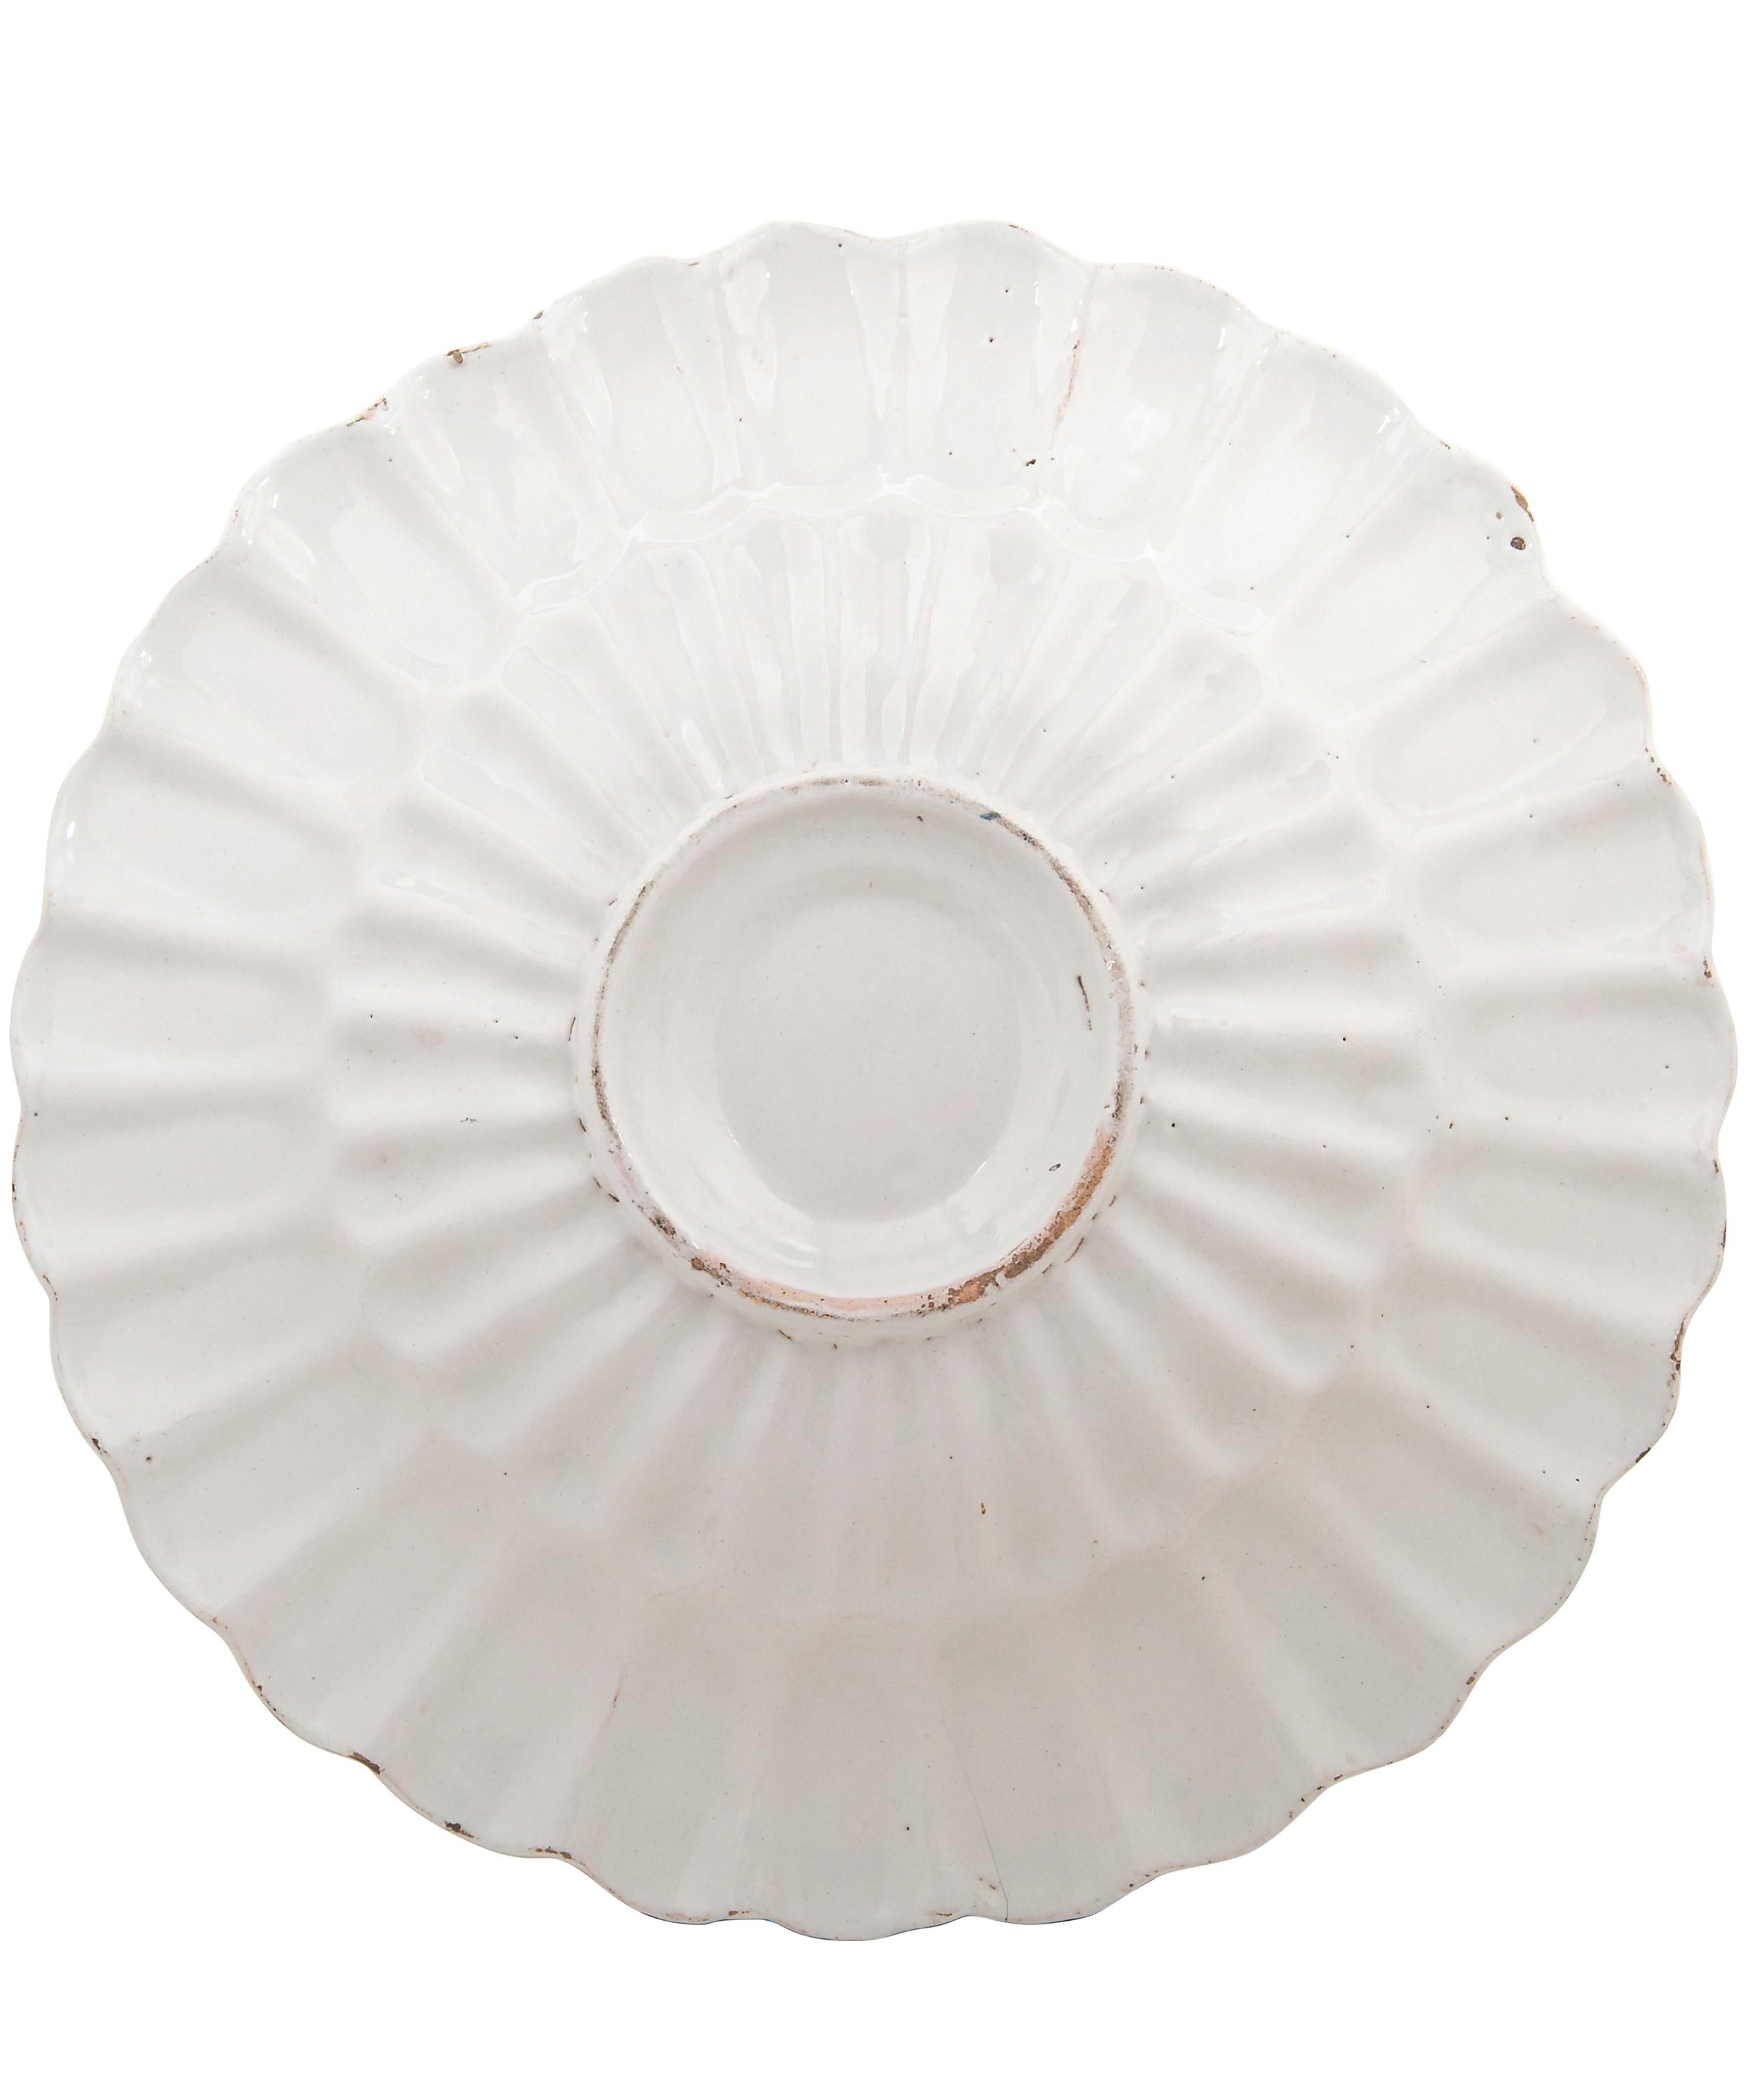 The edge of the dish consists of 29 lobes, which begin at the outer edge and disappear halfway into the shelf. The shelf of the dish is convex. The back is equipped with a stand ring.